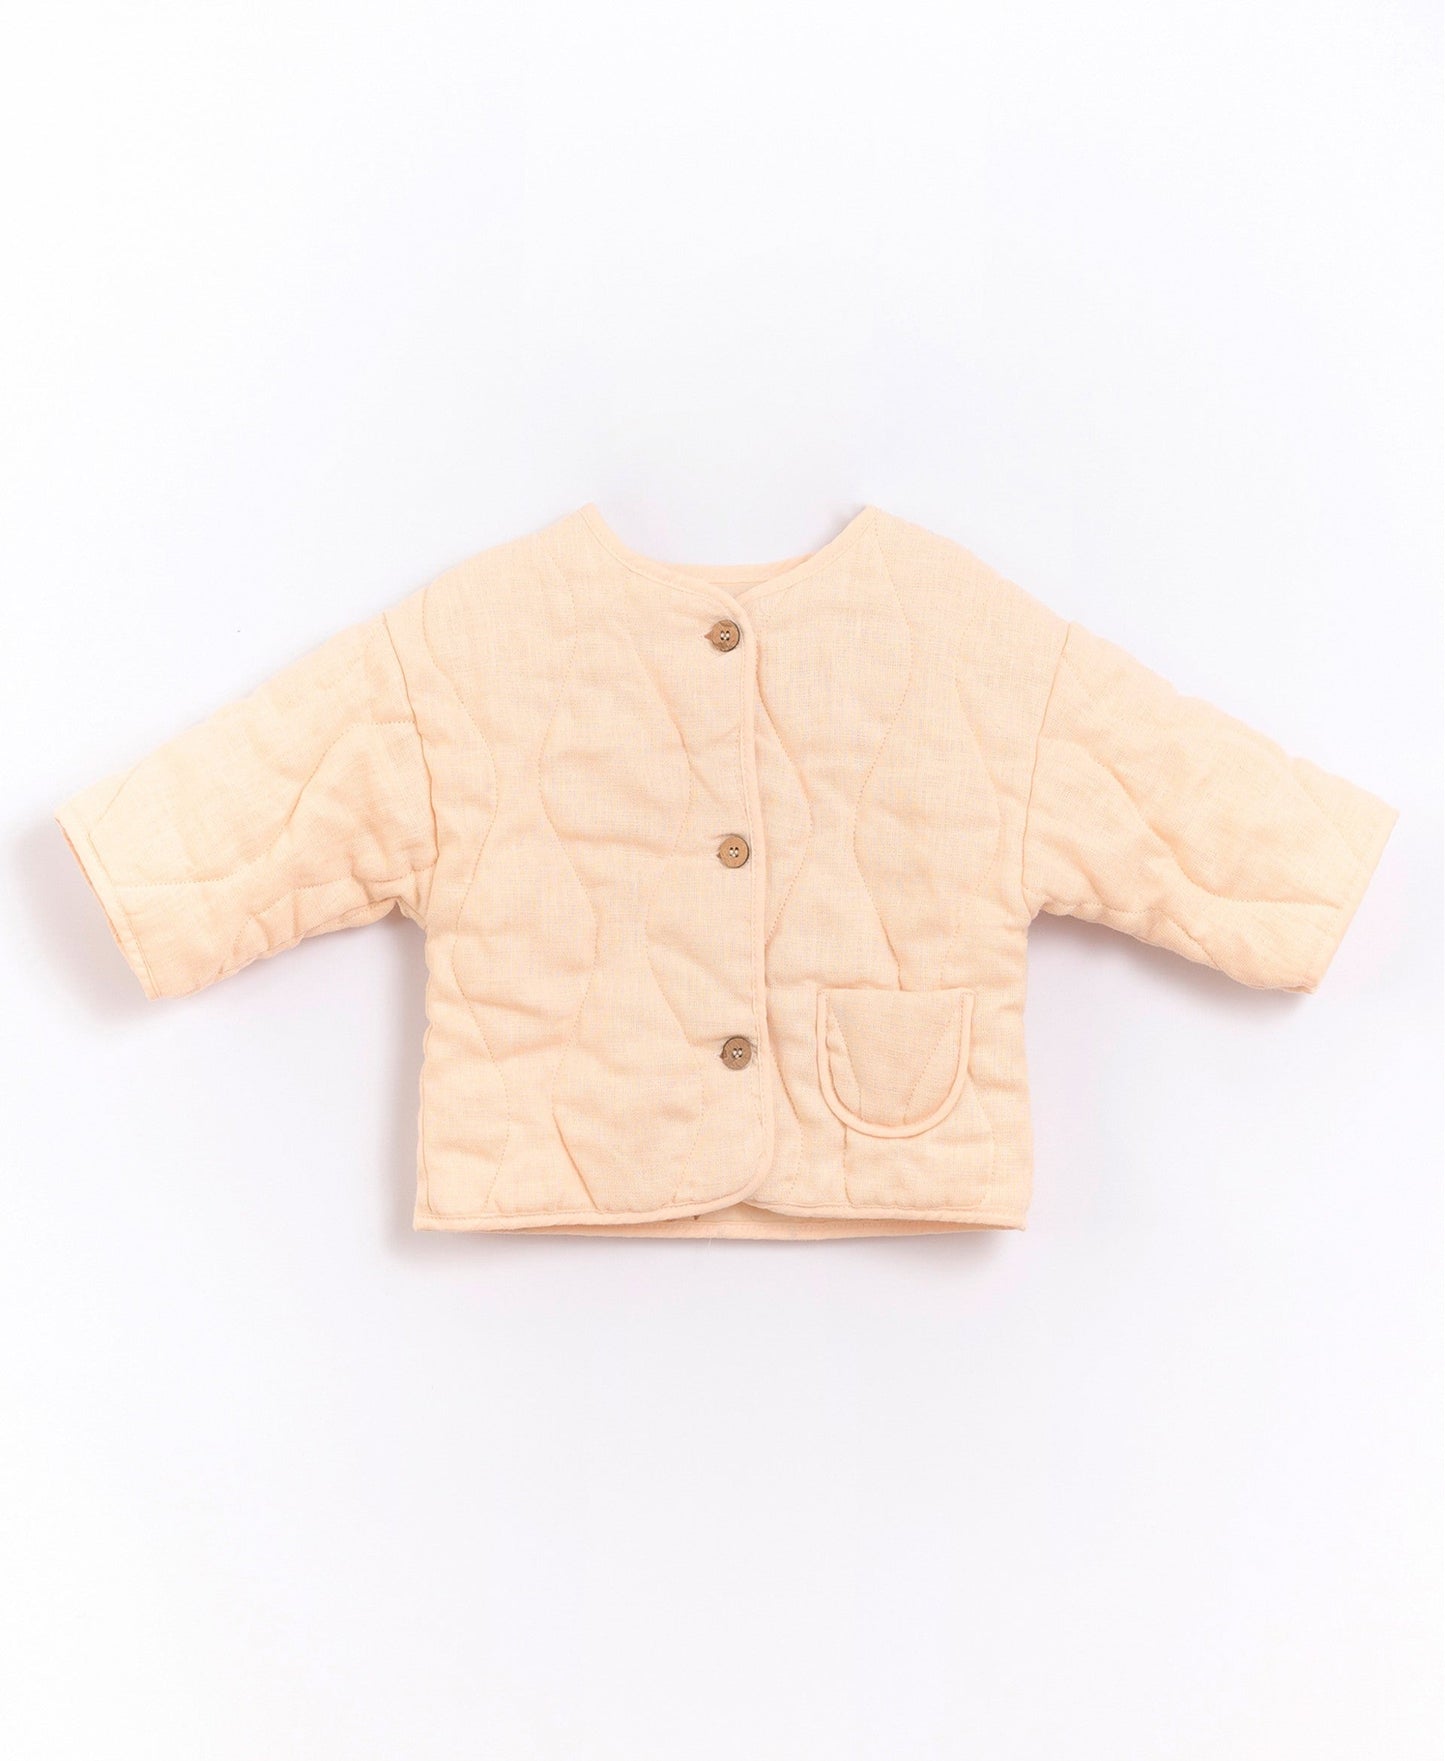 Play Up - Linen jacket with button openings | Basketry